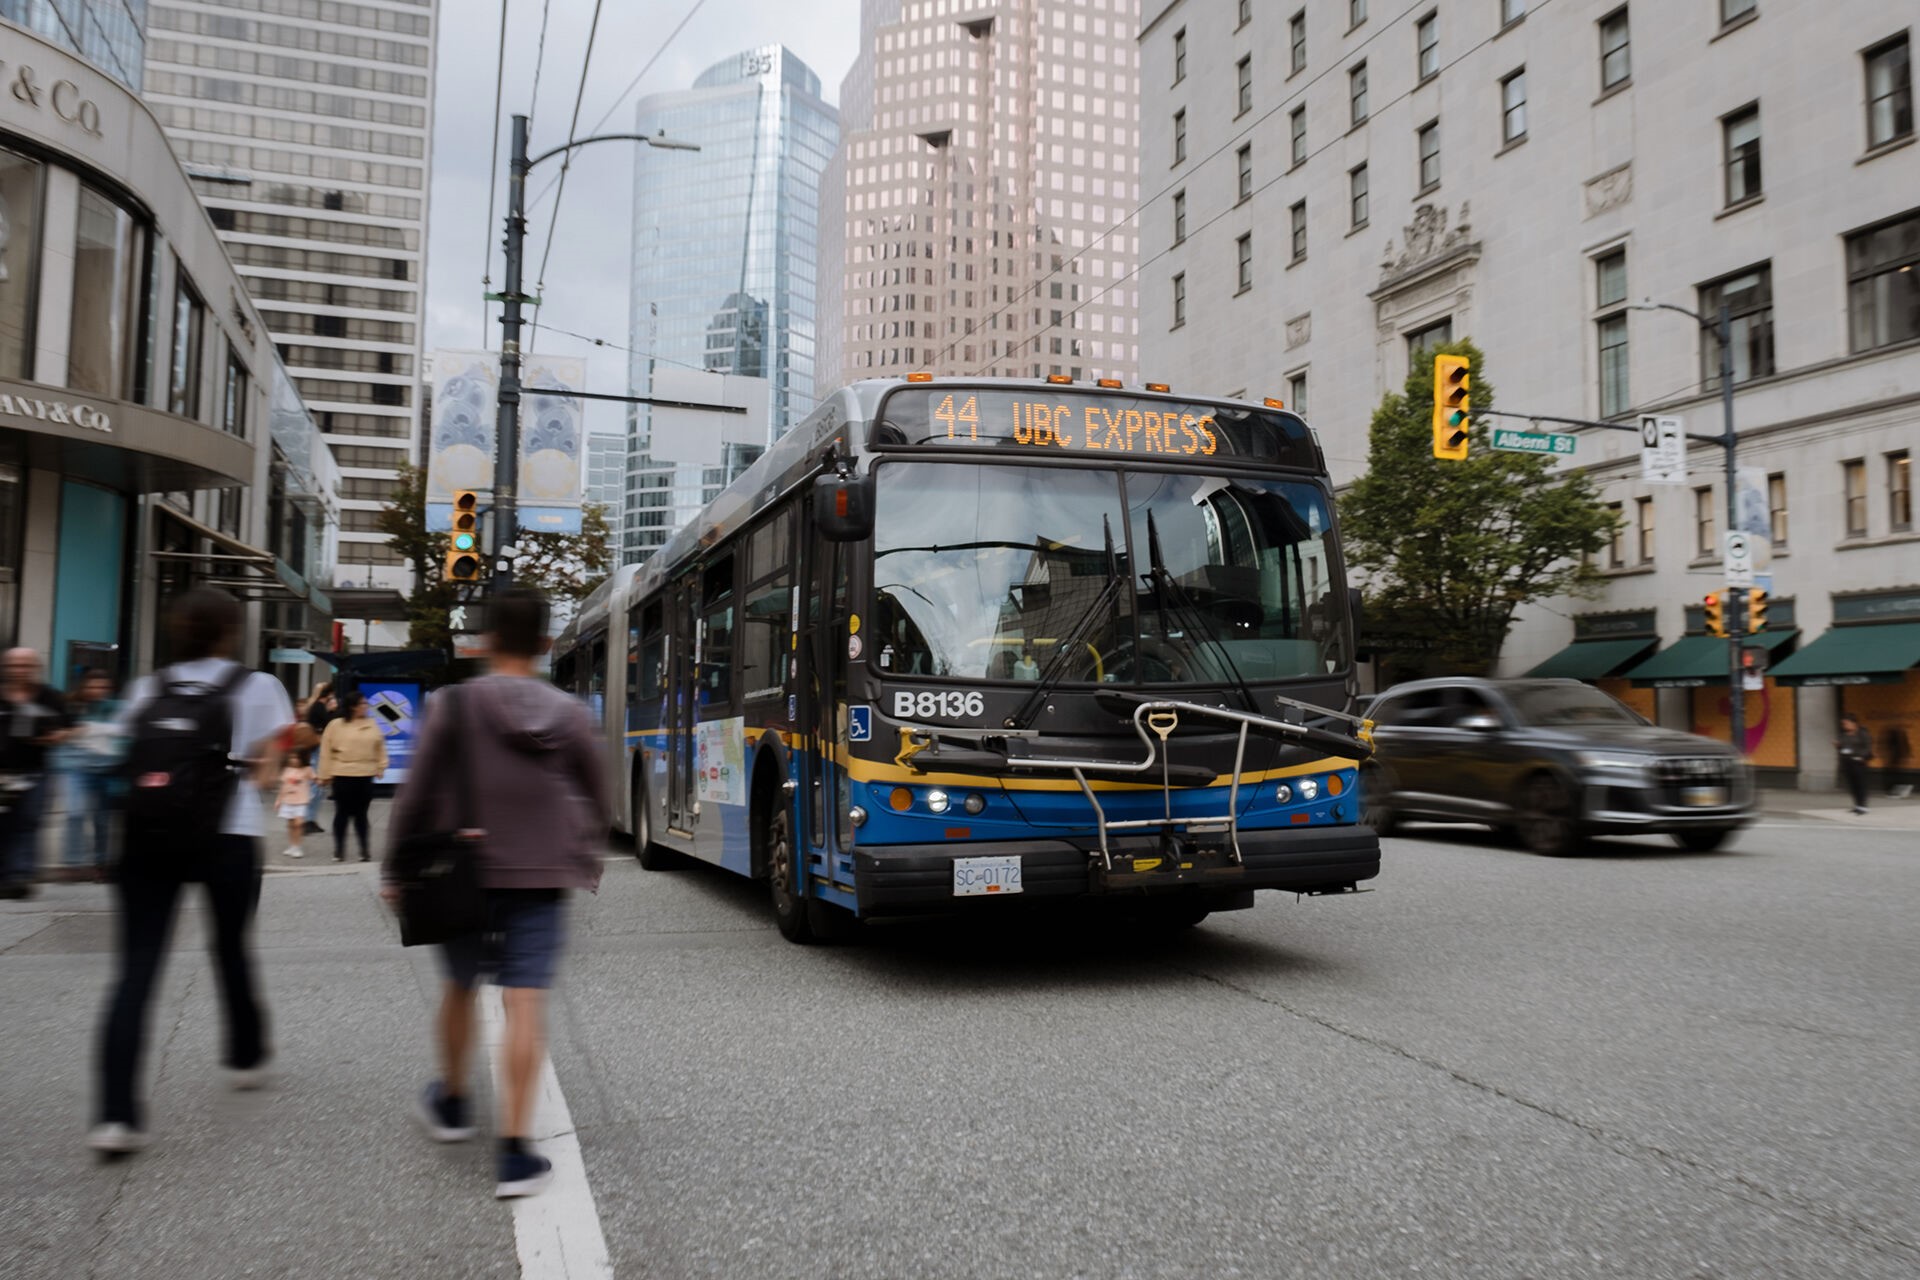 Route 44 UBC extension bus in Downtown Vancouver